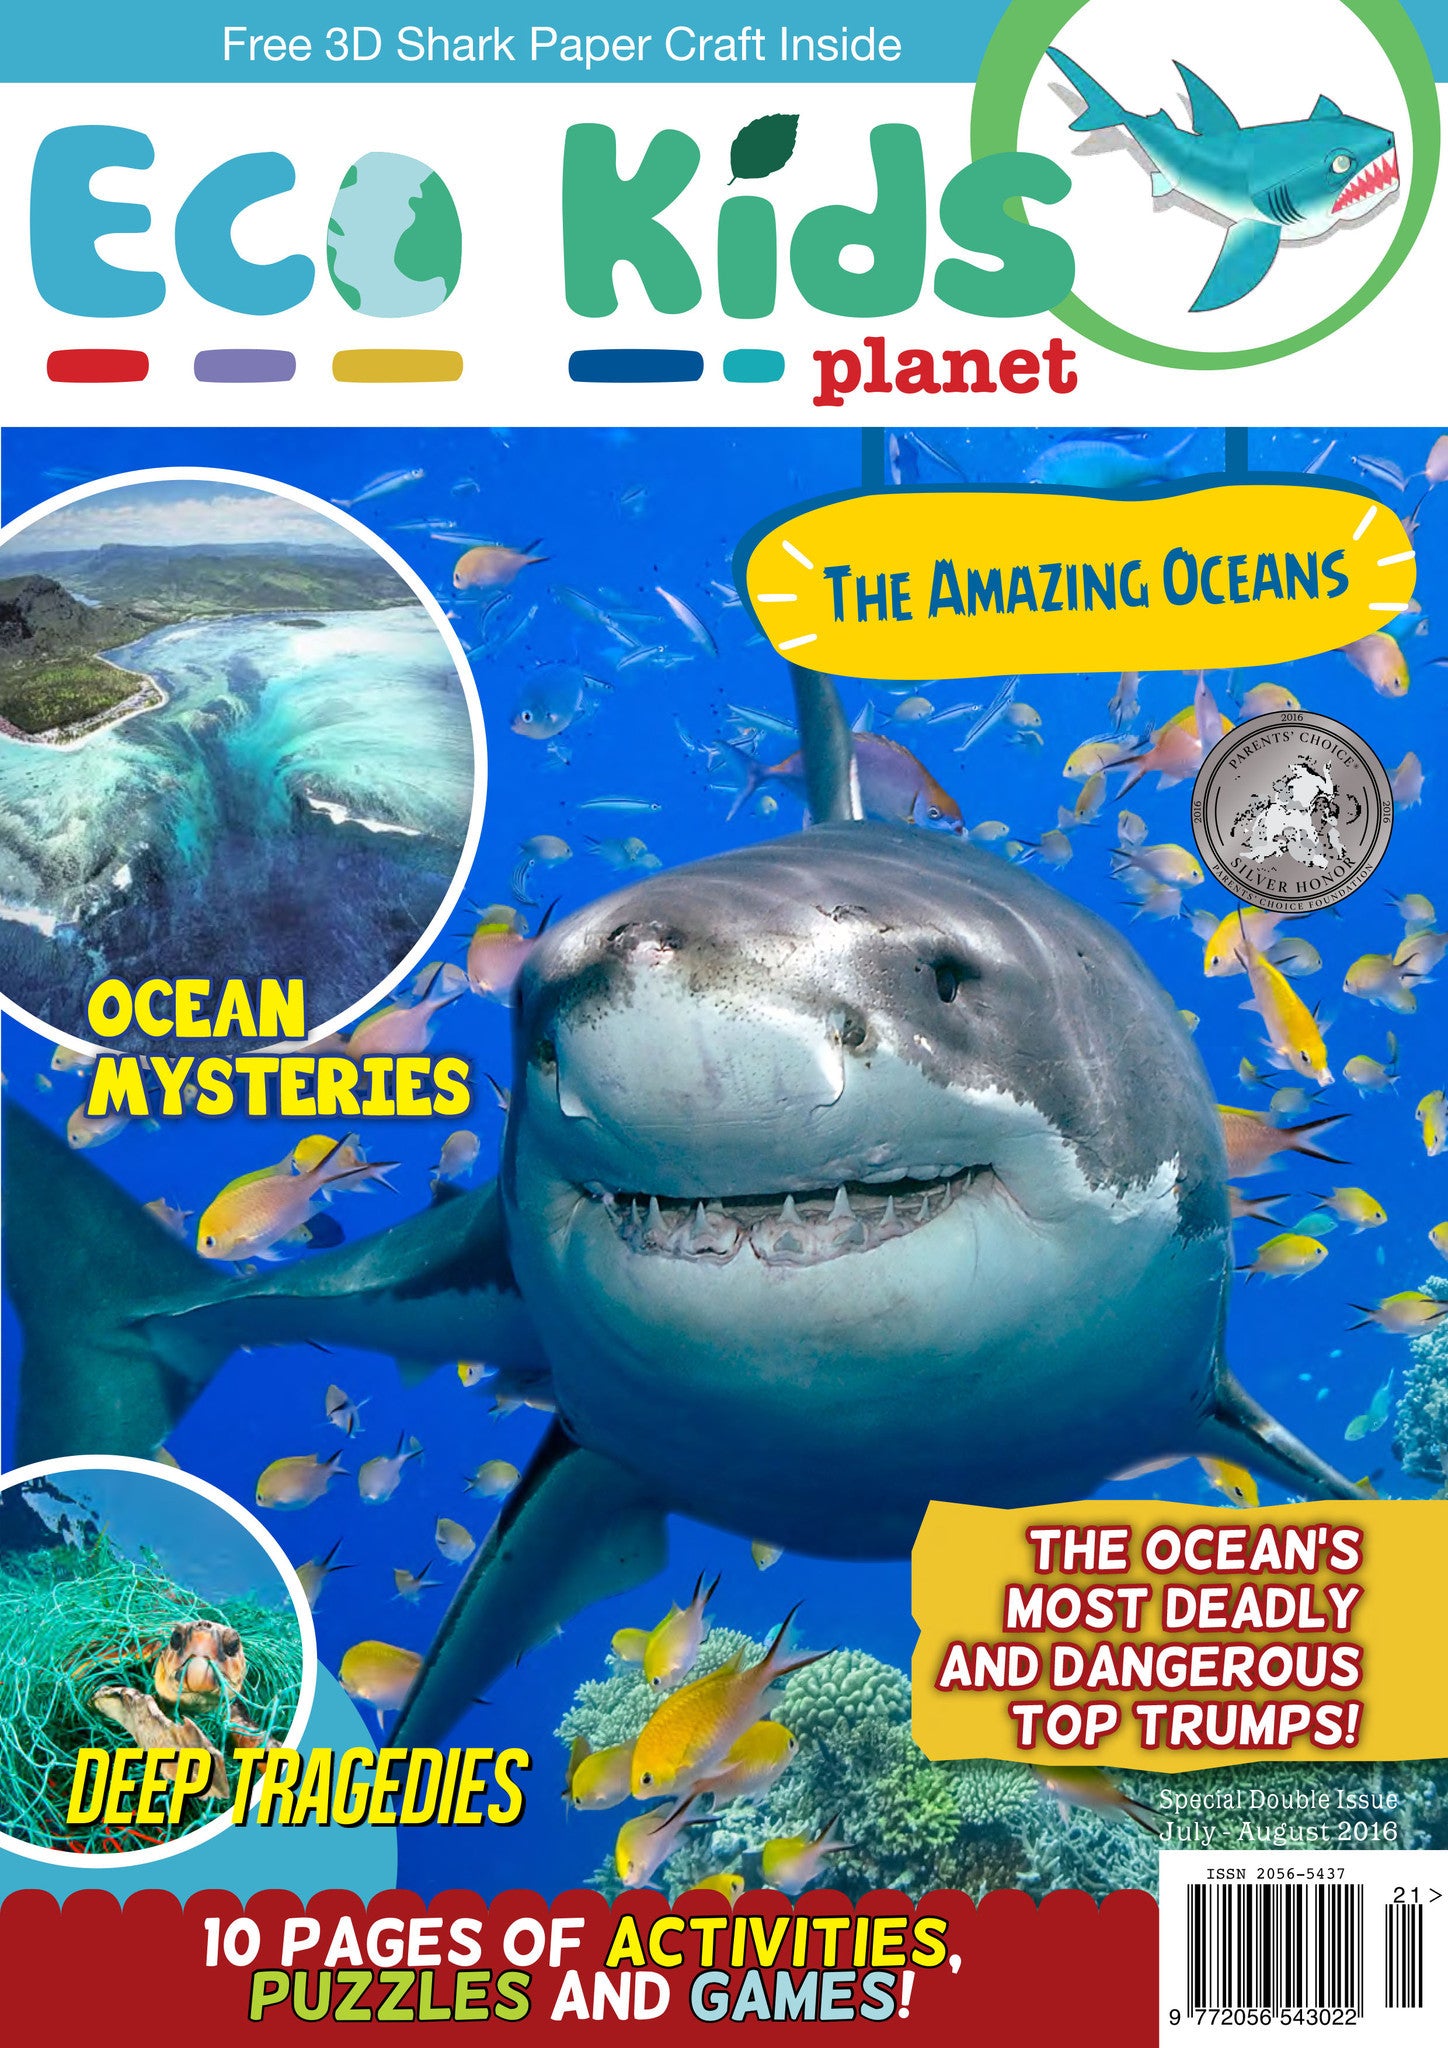 Kid's Nature Magazines - Issue 21/22 - The Amazing Oceans